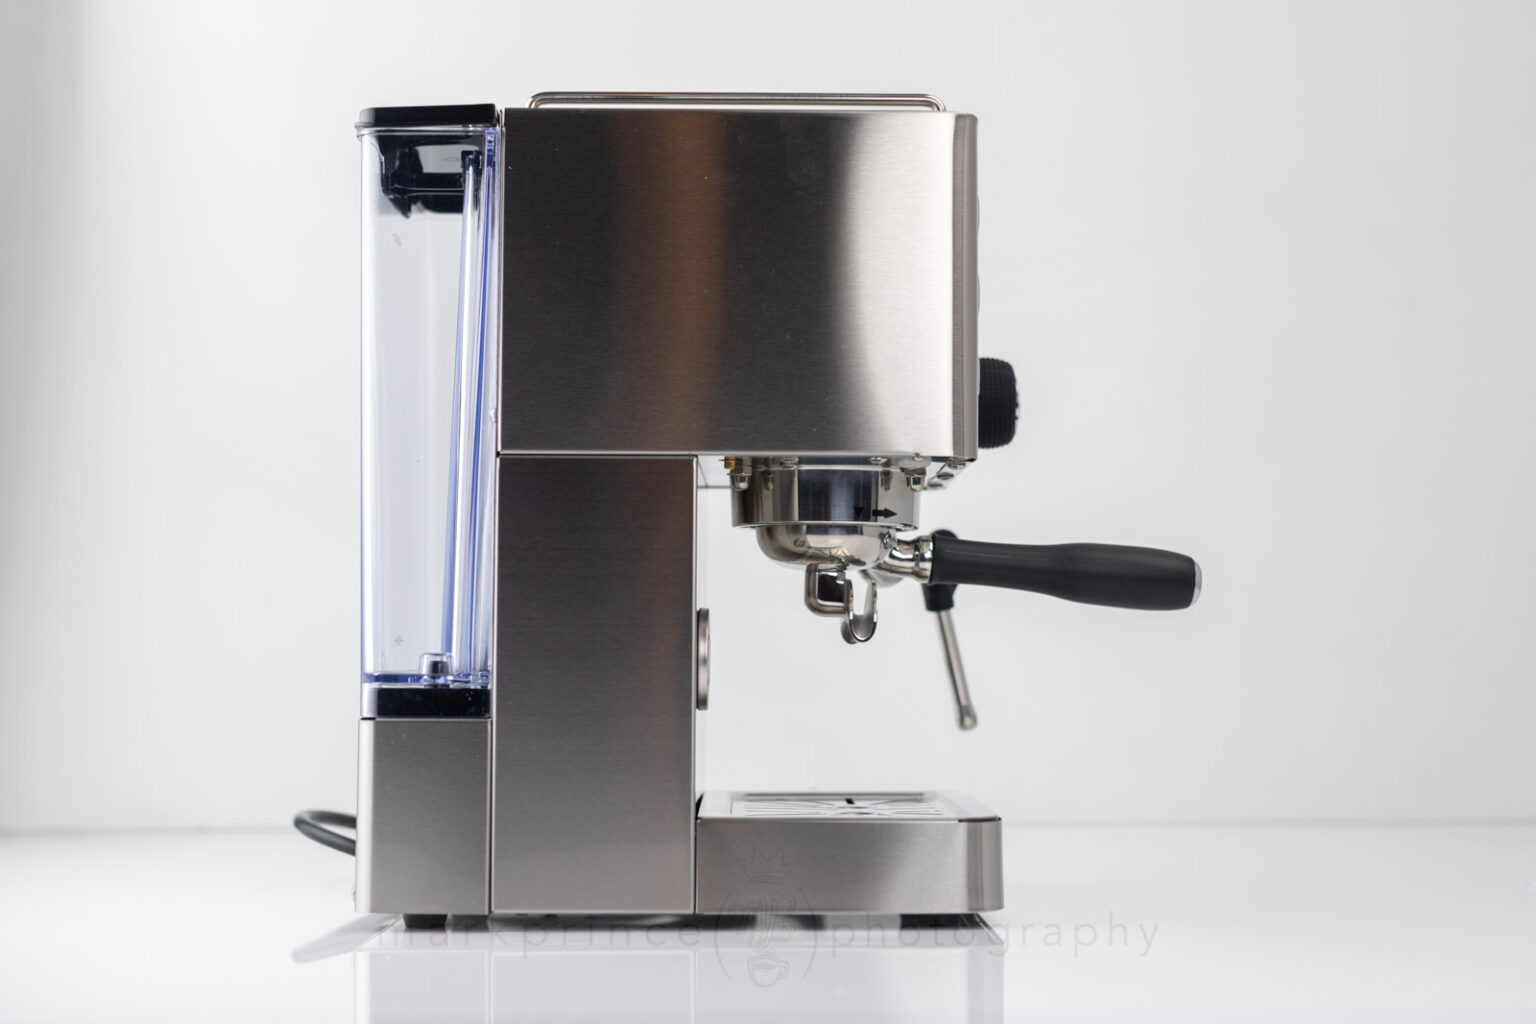 The machine isn't very deep; it is about as deep as a Rancilio Silvia, but the Legato shows you the reservoir externally